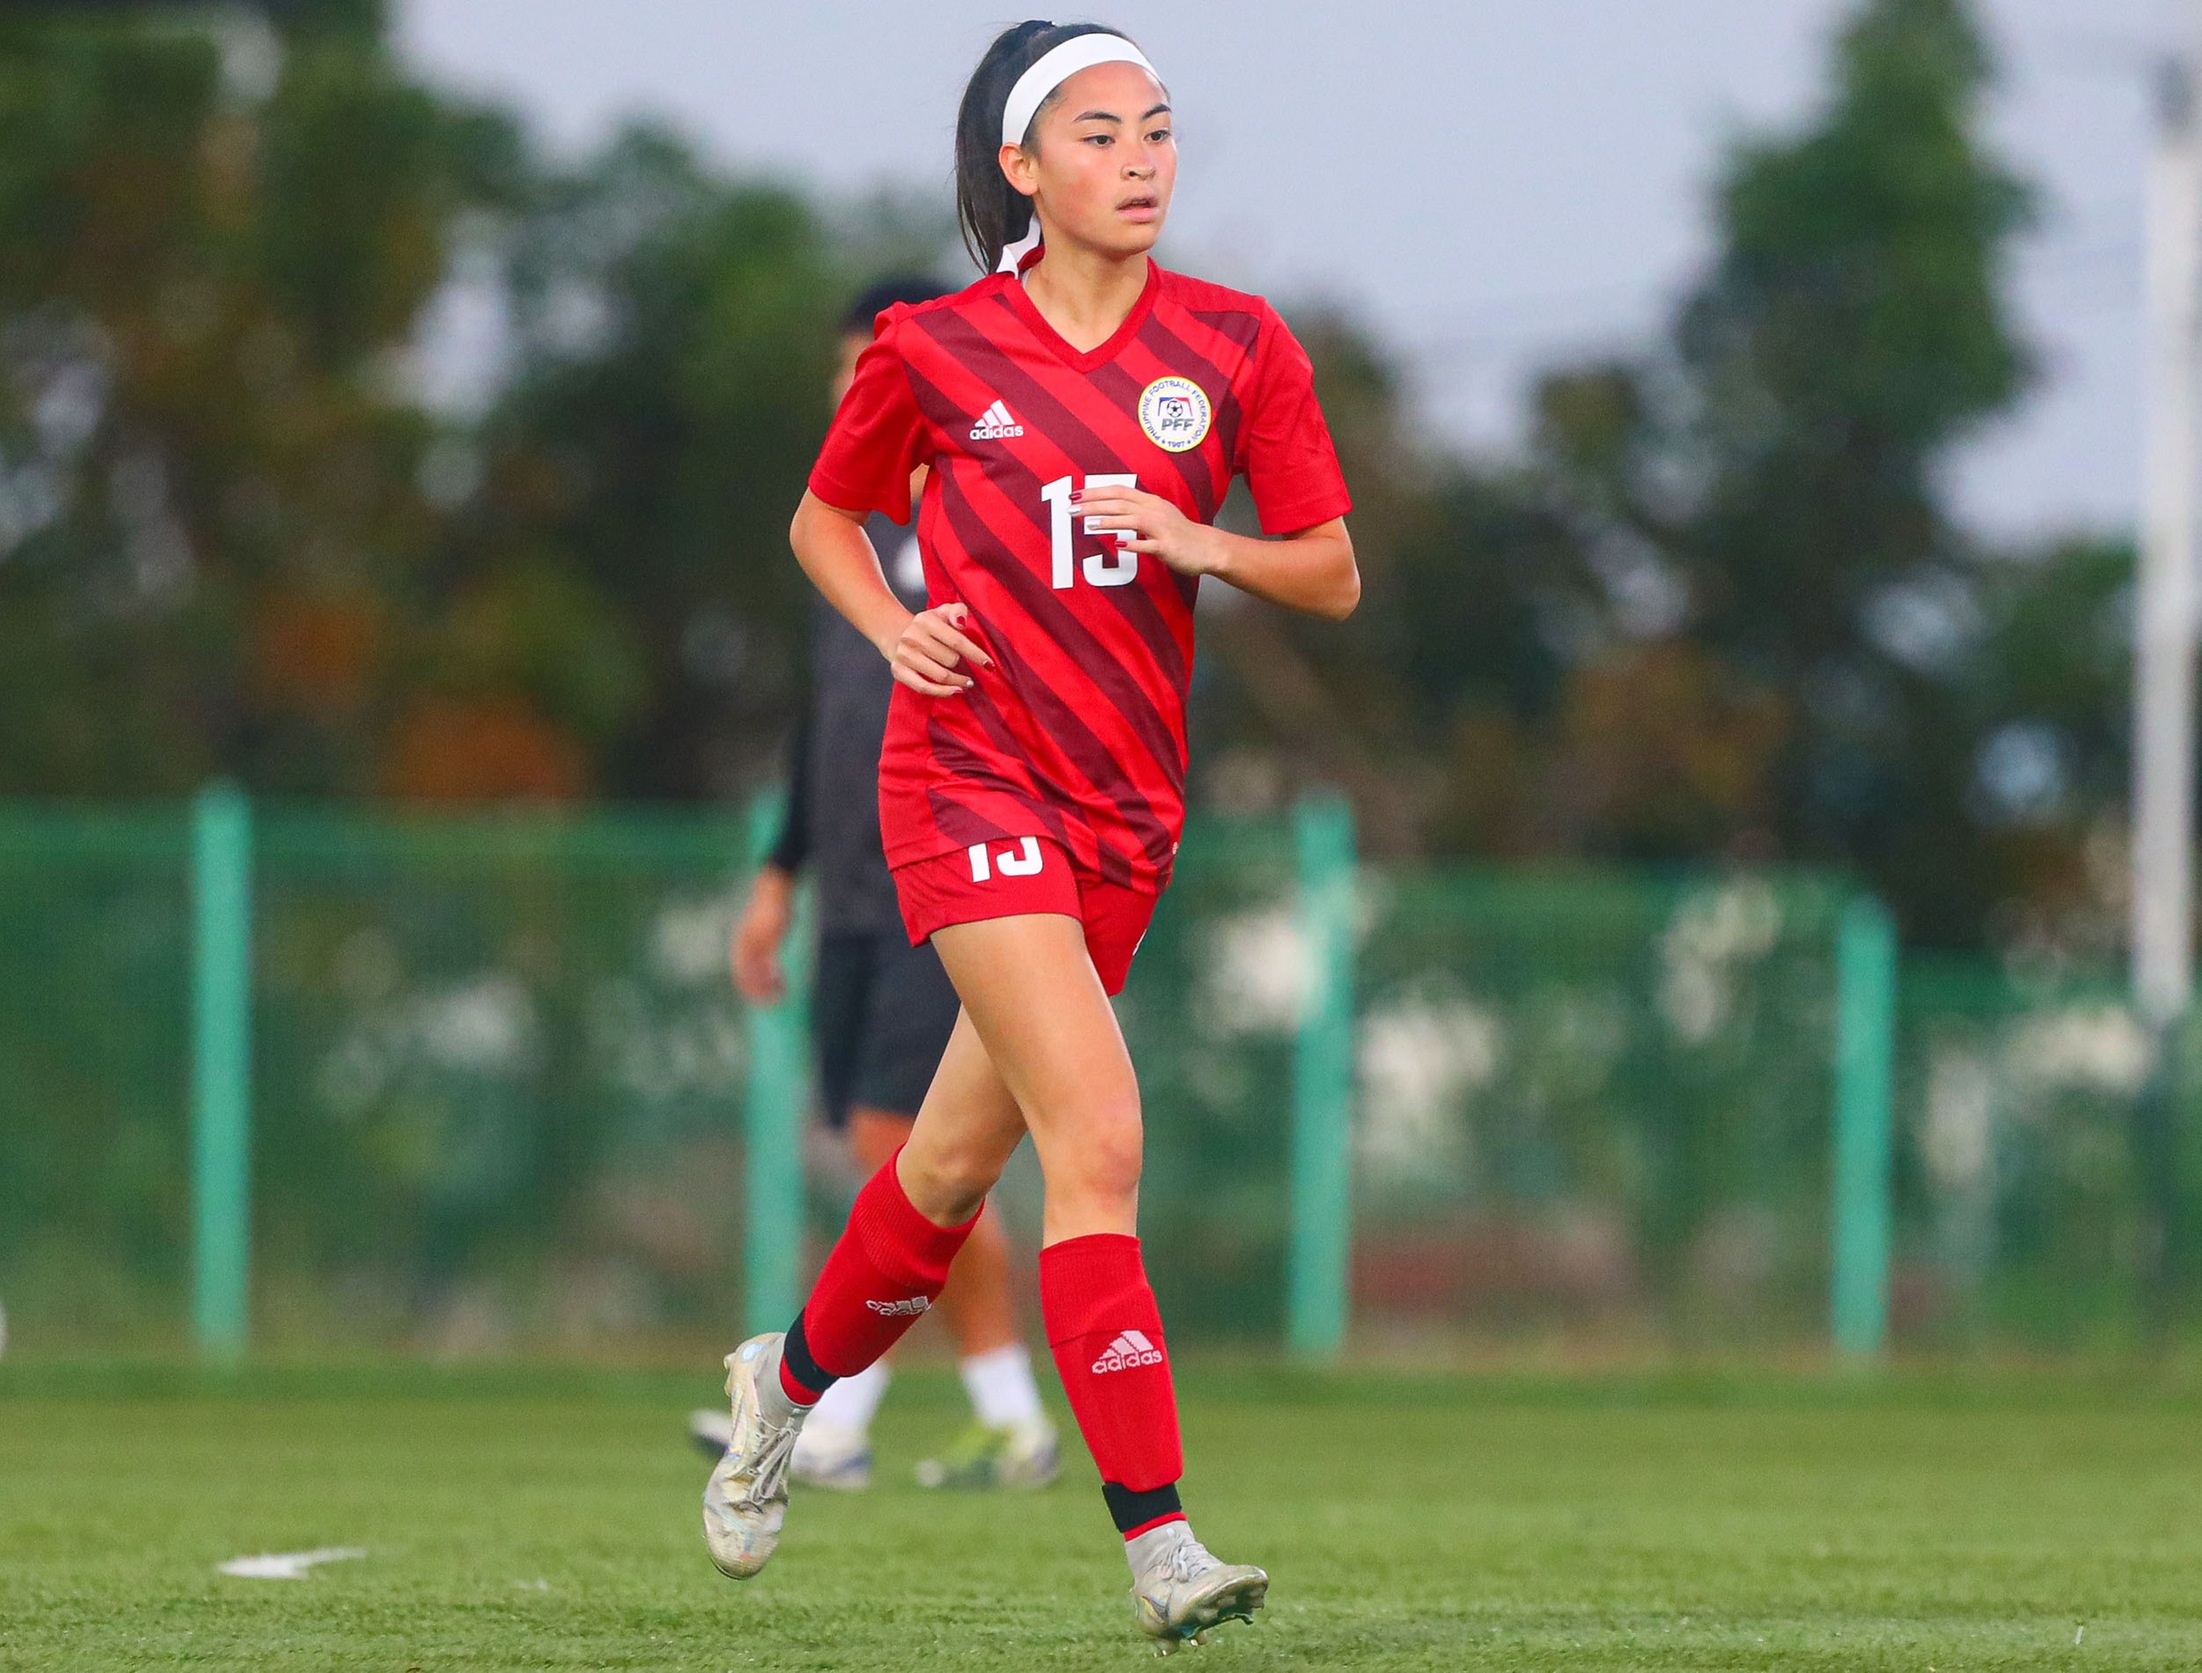 kylie anne yap jogs on the field during a philippines national game in 2022